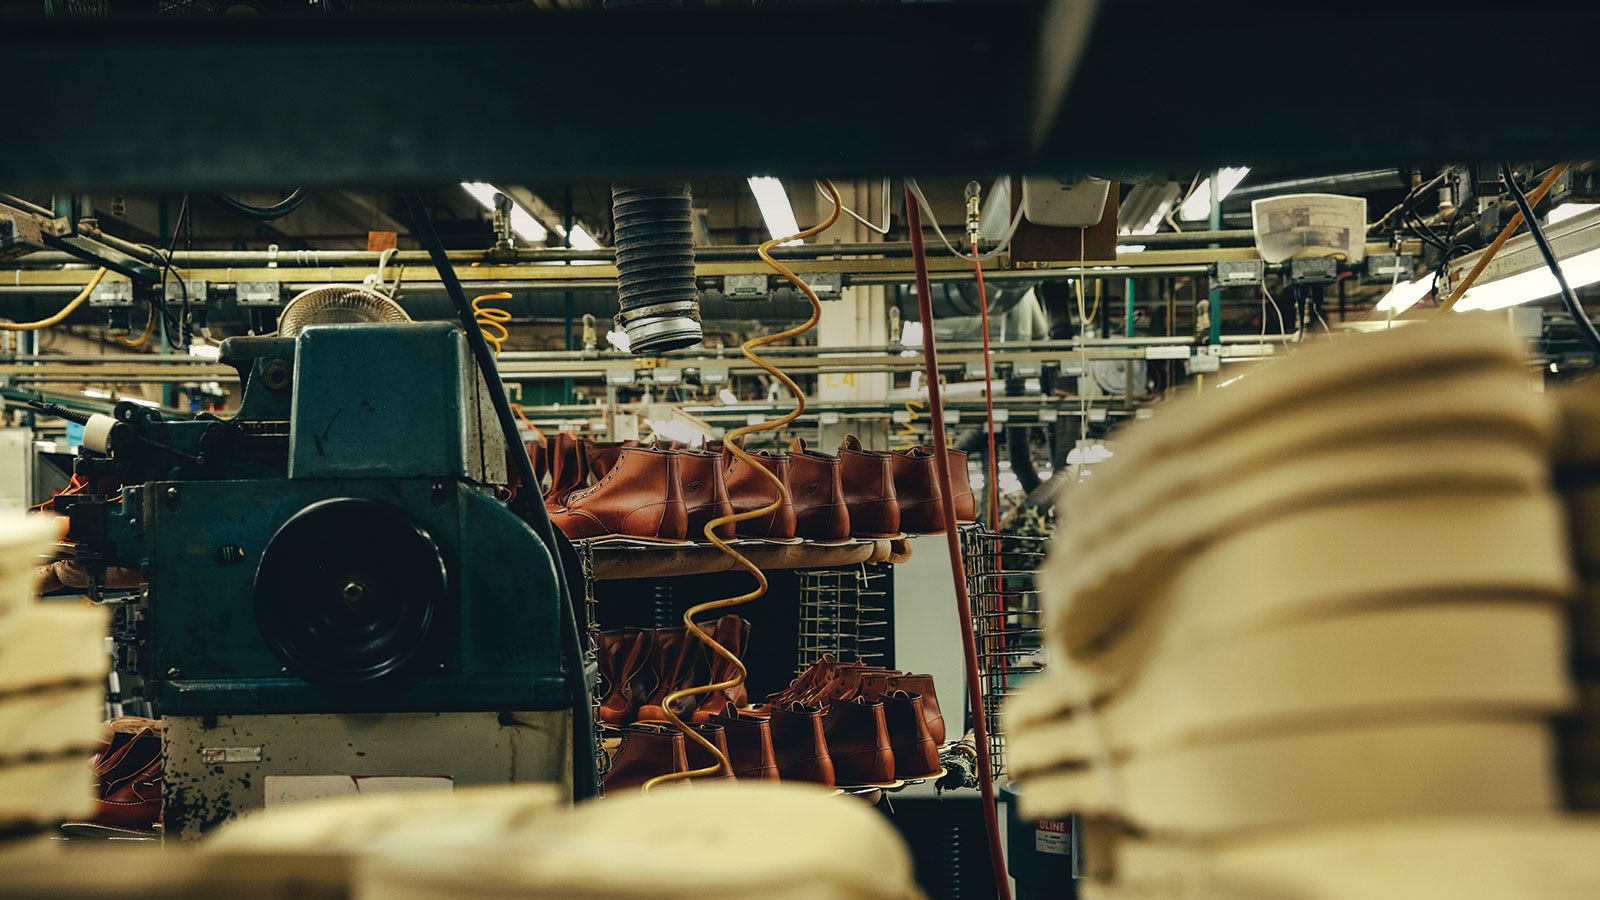 Behind the Scenes at the Red Wing Boots 